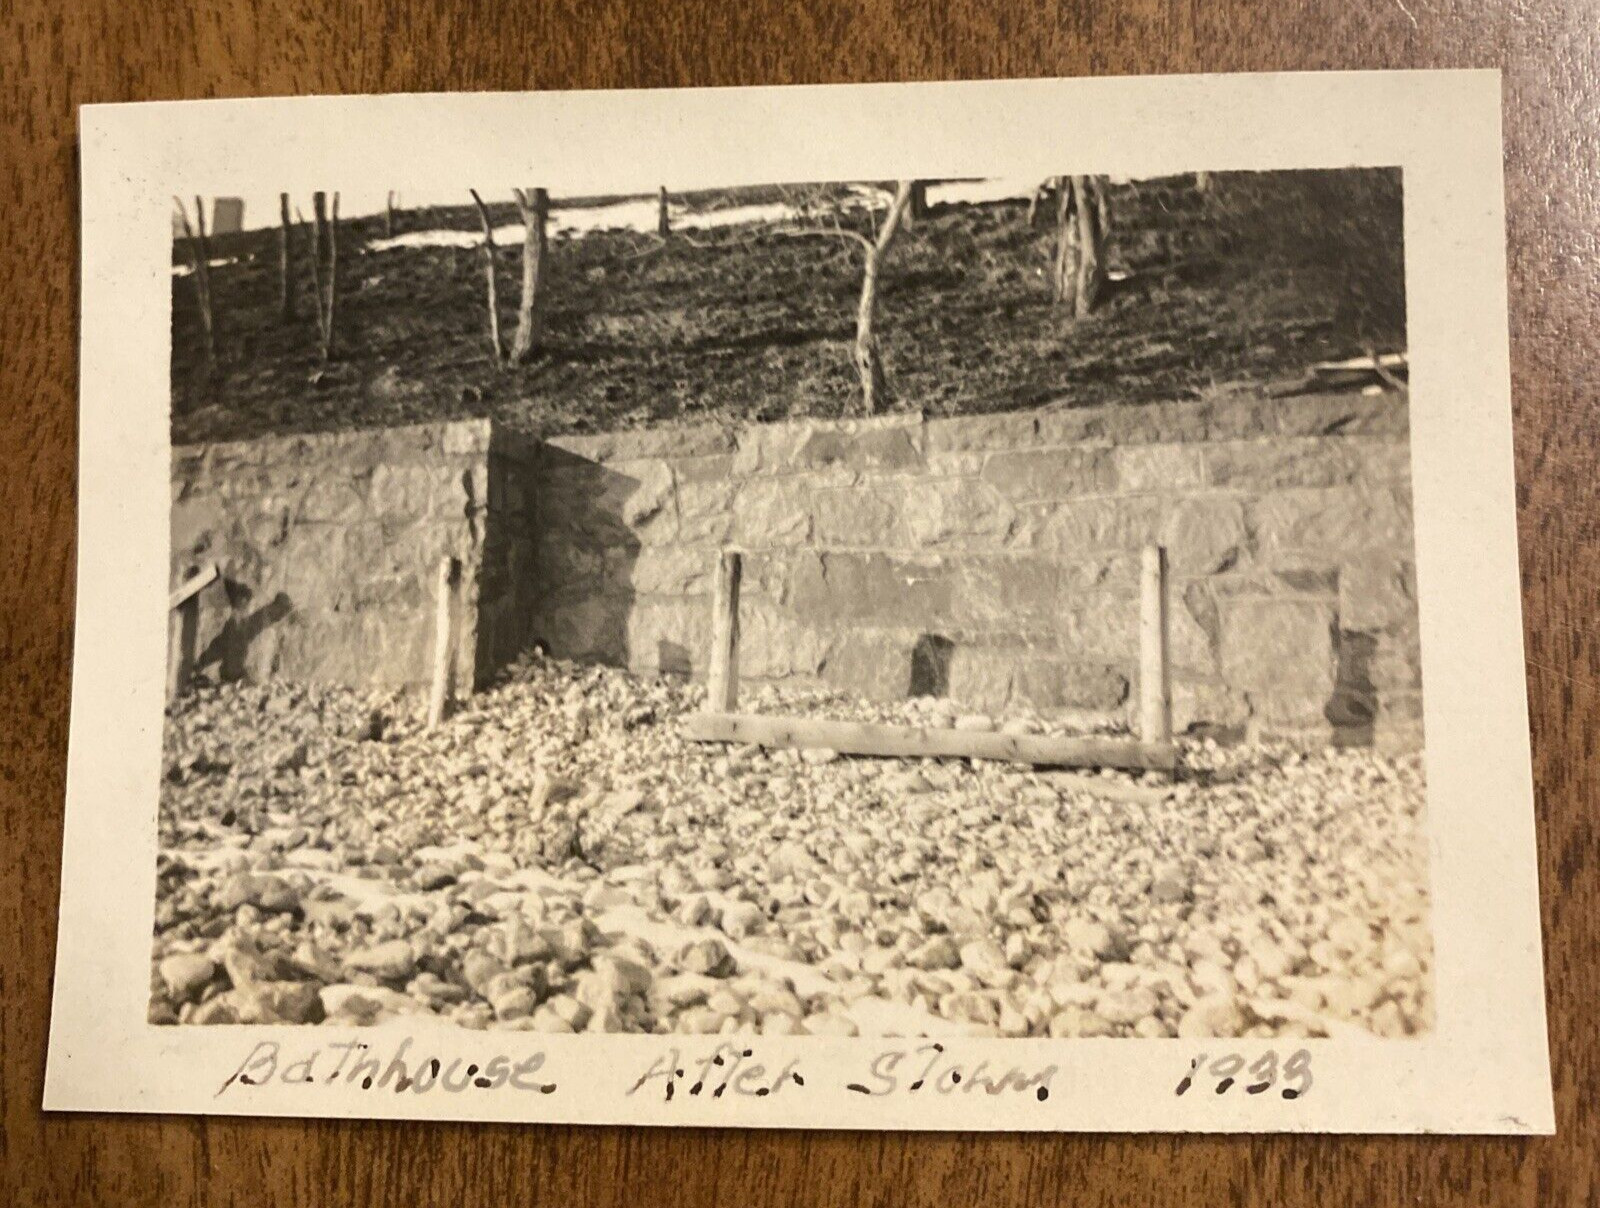 1933 Singing Beach Manchester-by-the-sea Massachusetts Storm Damage Photo P6i5